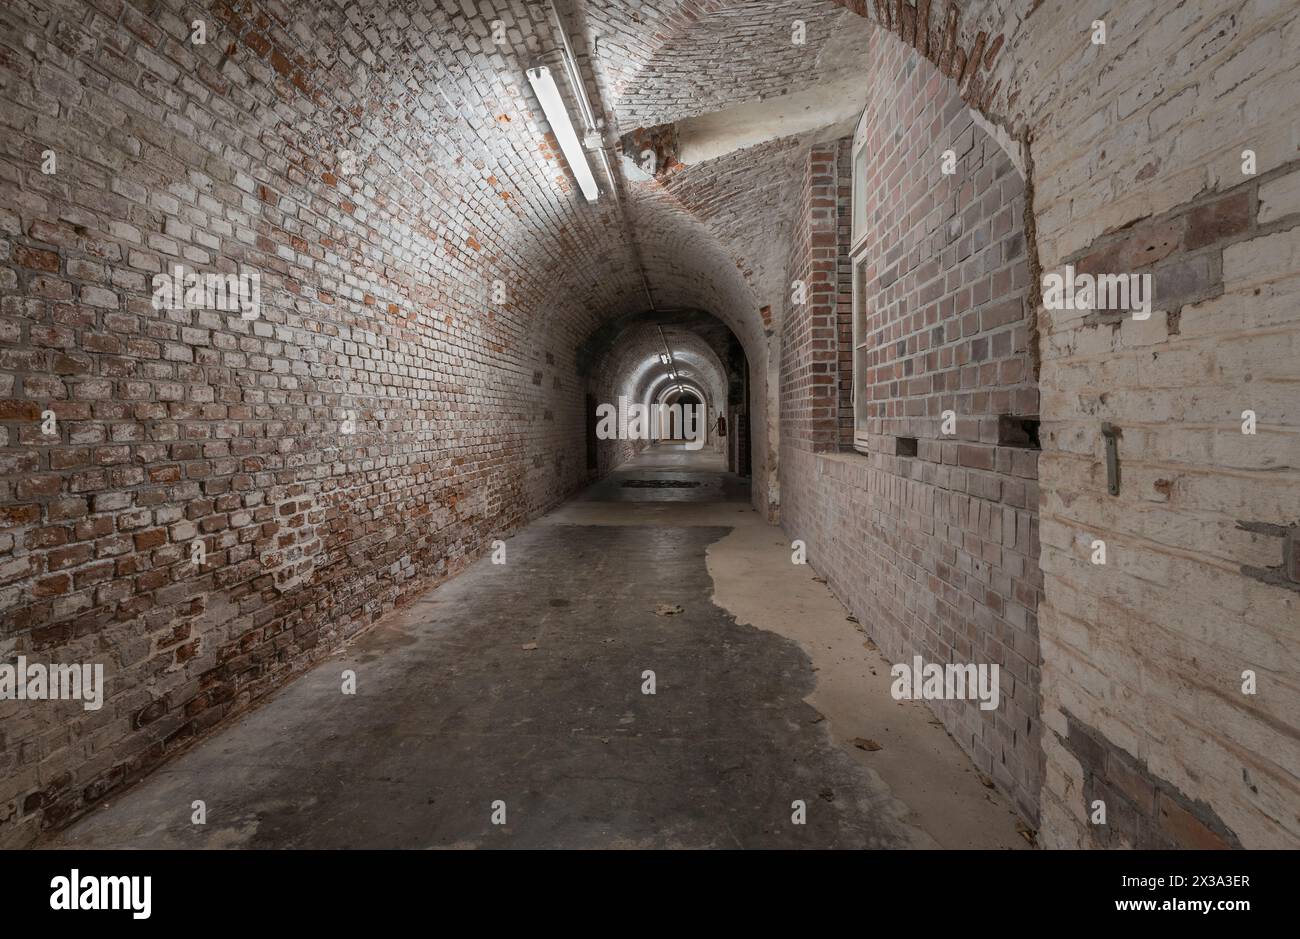 Tunnel of a historic fortification. Stock Photo